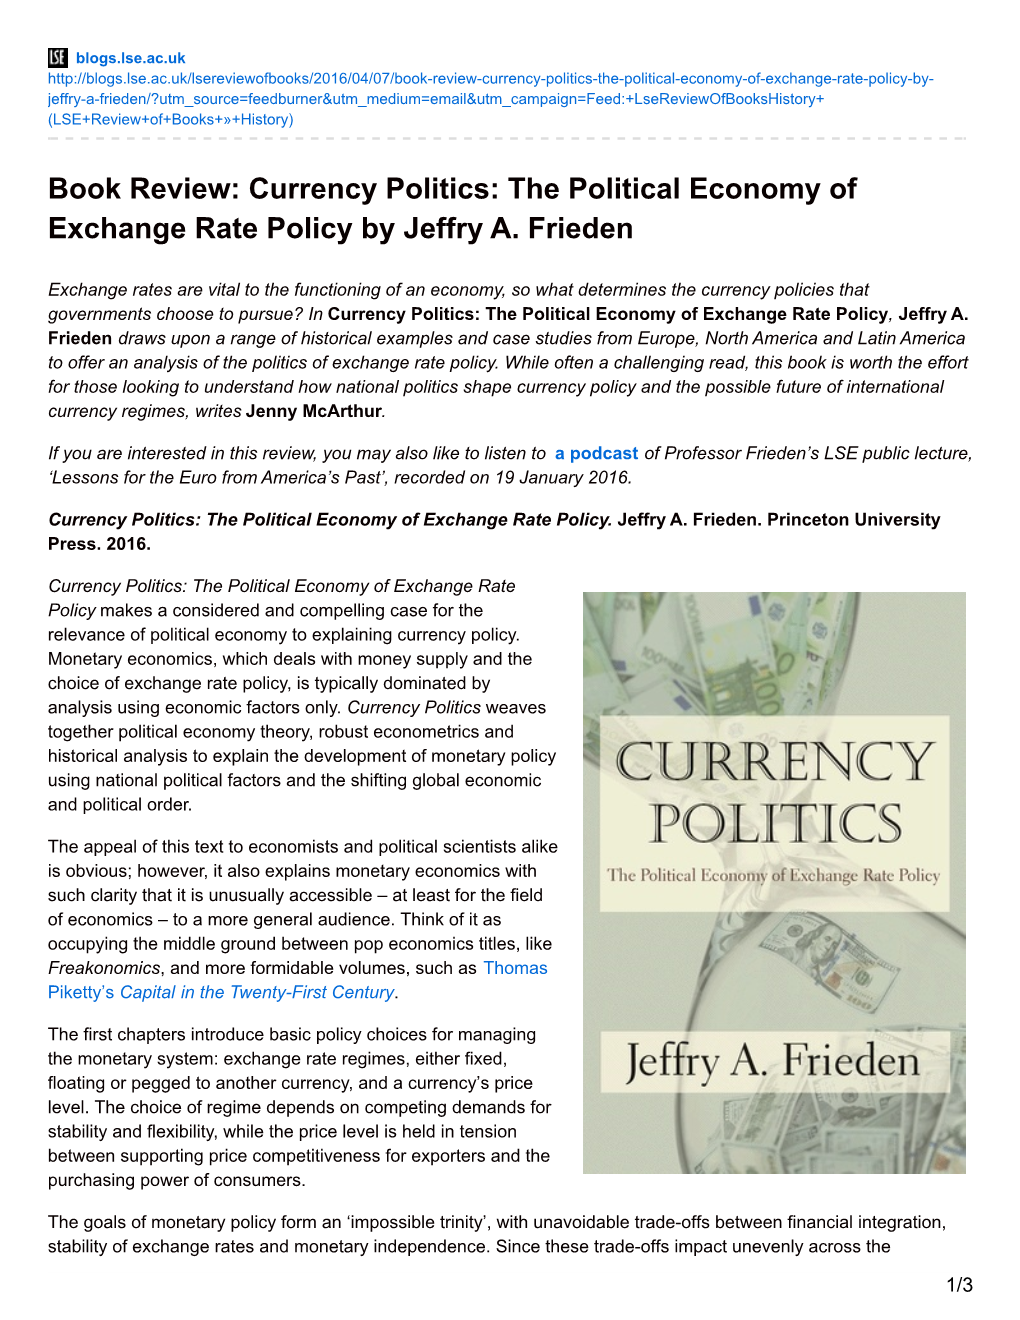 Book Review: Currency Politics: the Political Economy of Exchange Rate Policy by Jeffry A